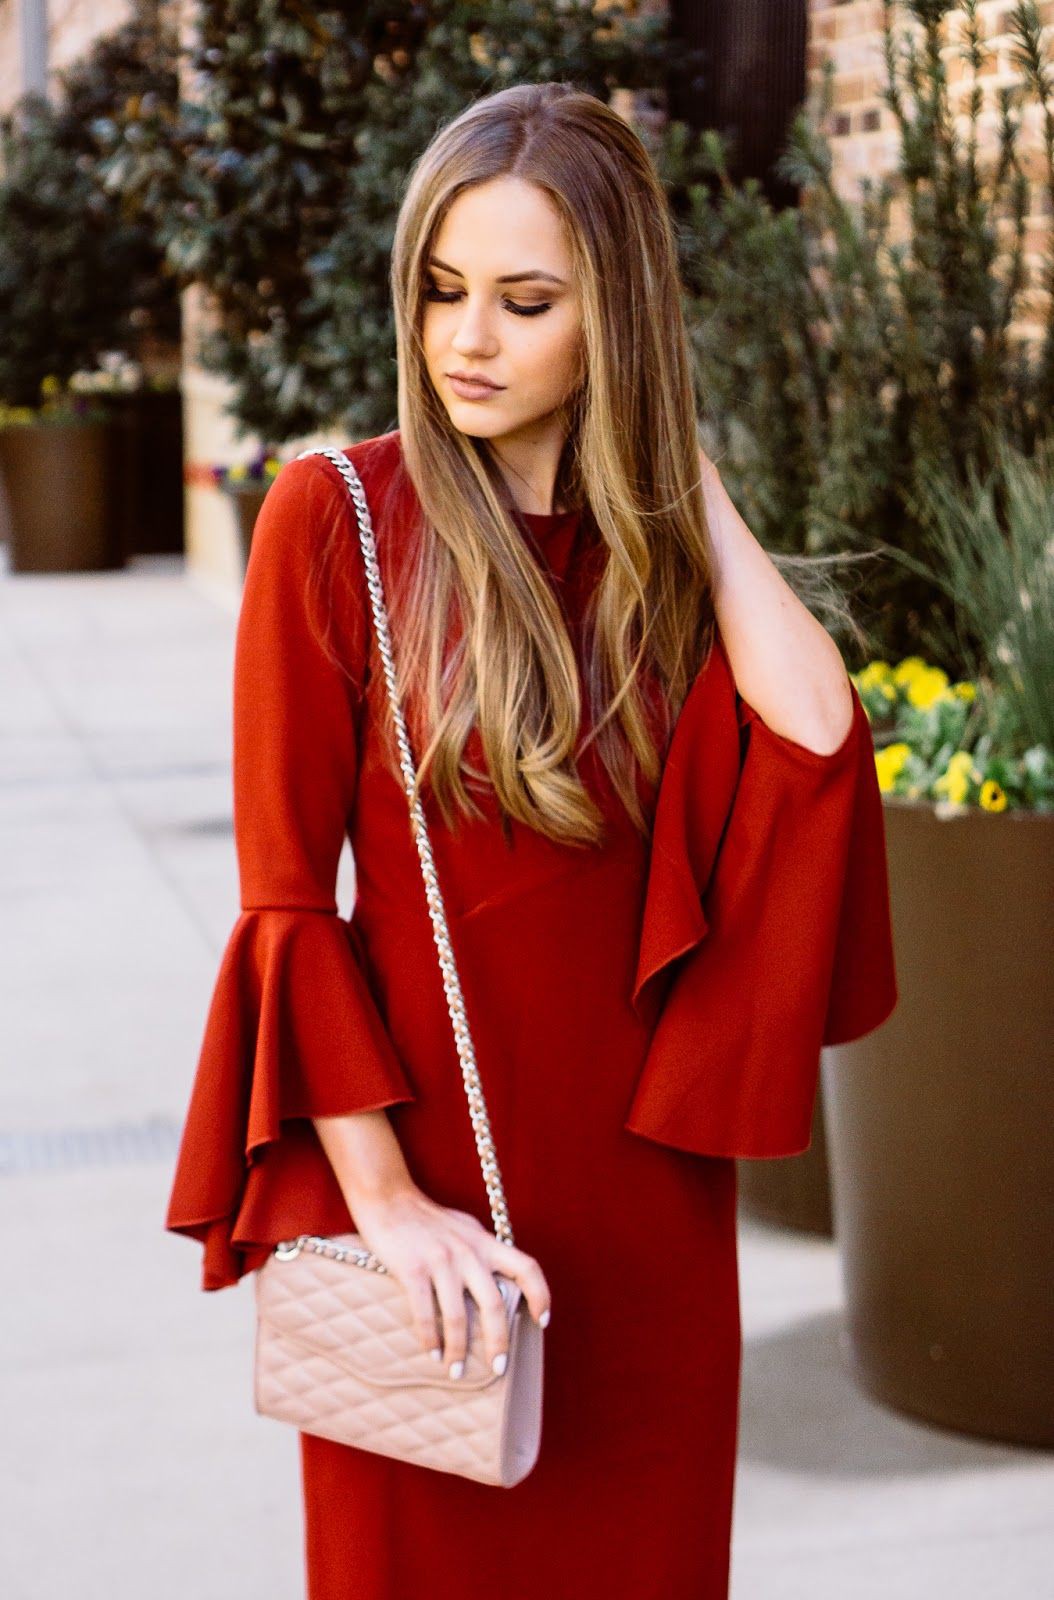 Nice to see classy lady, Photo shoot | Outfit Ideas For Valentine's Day ...